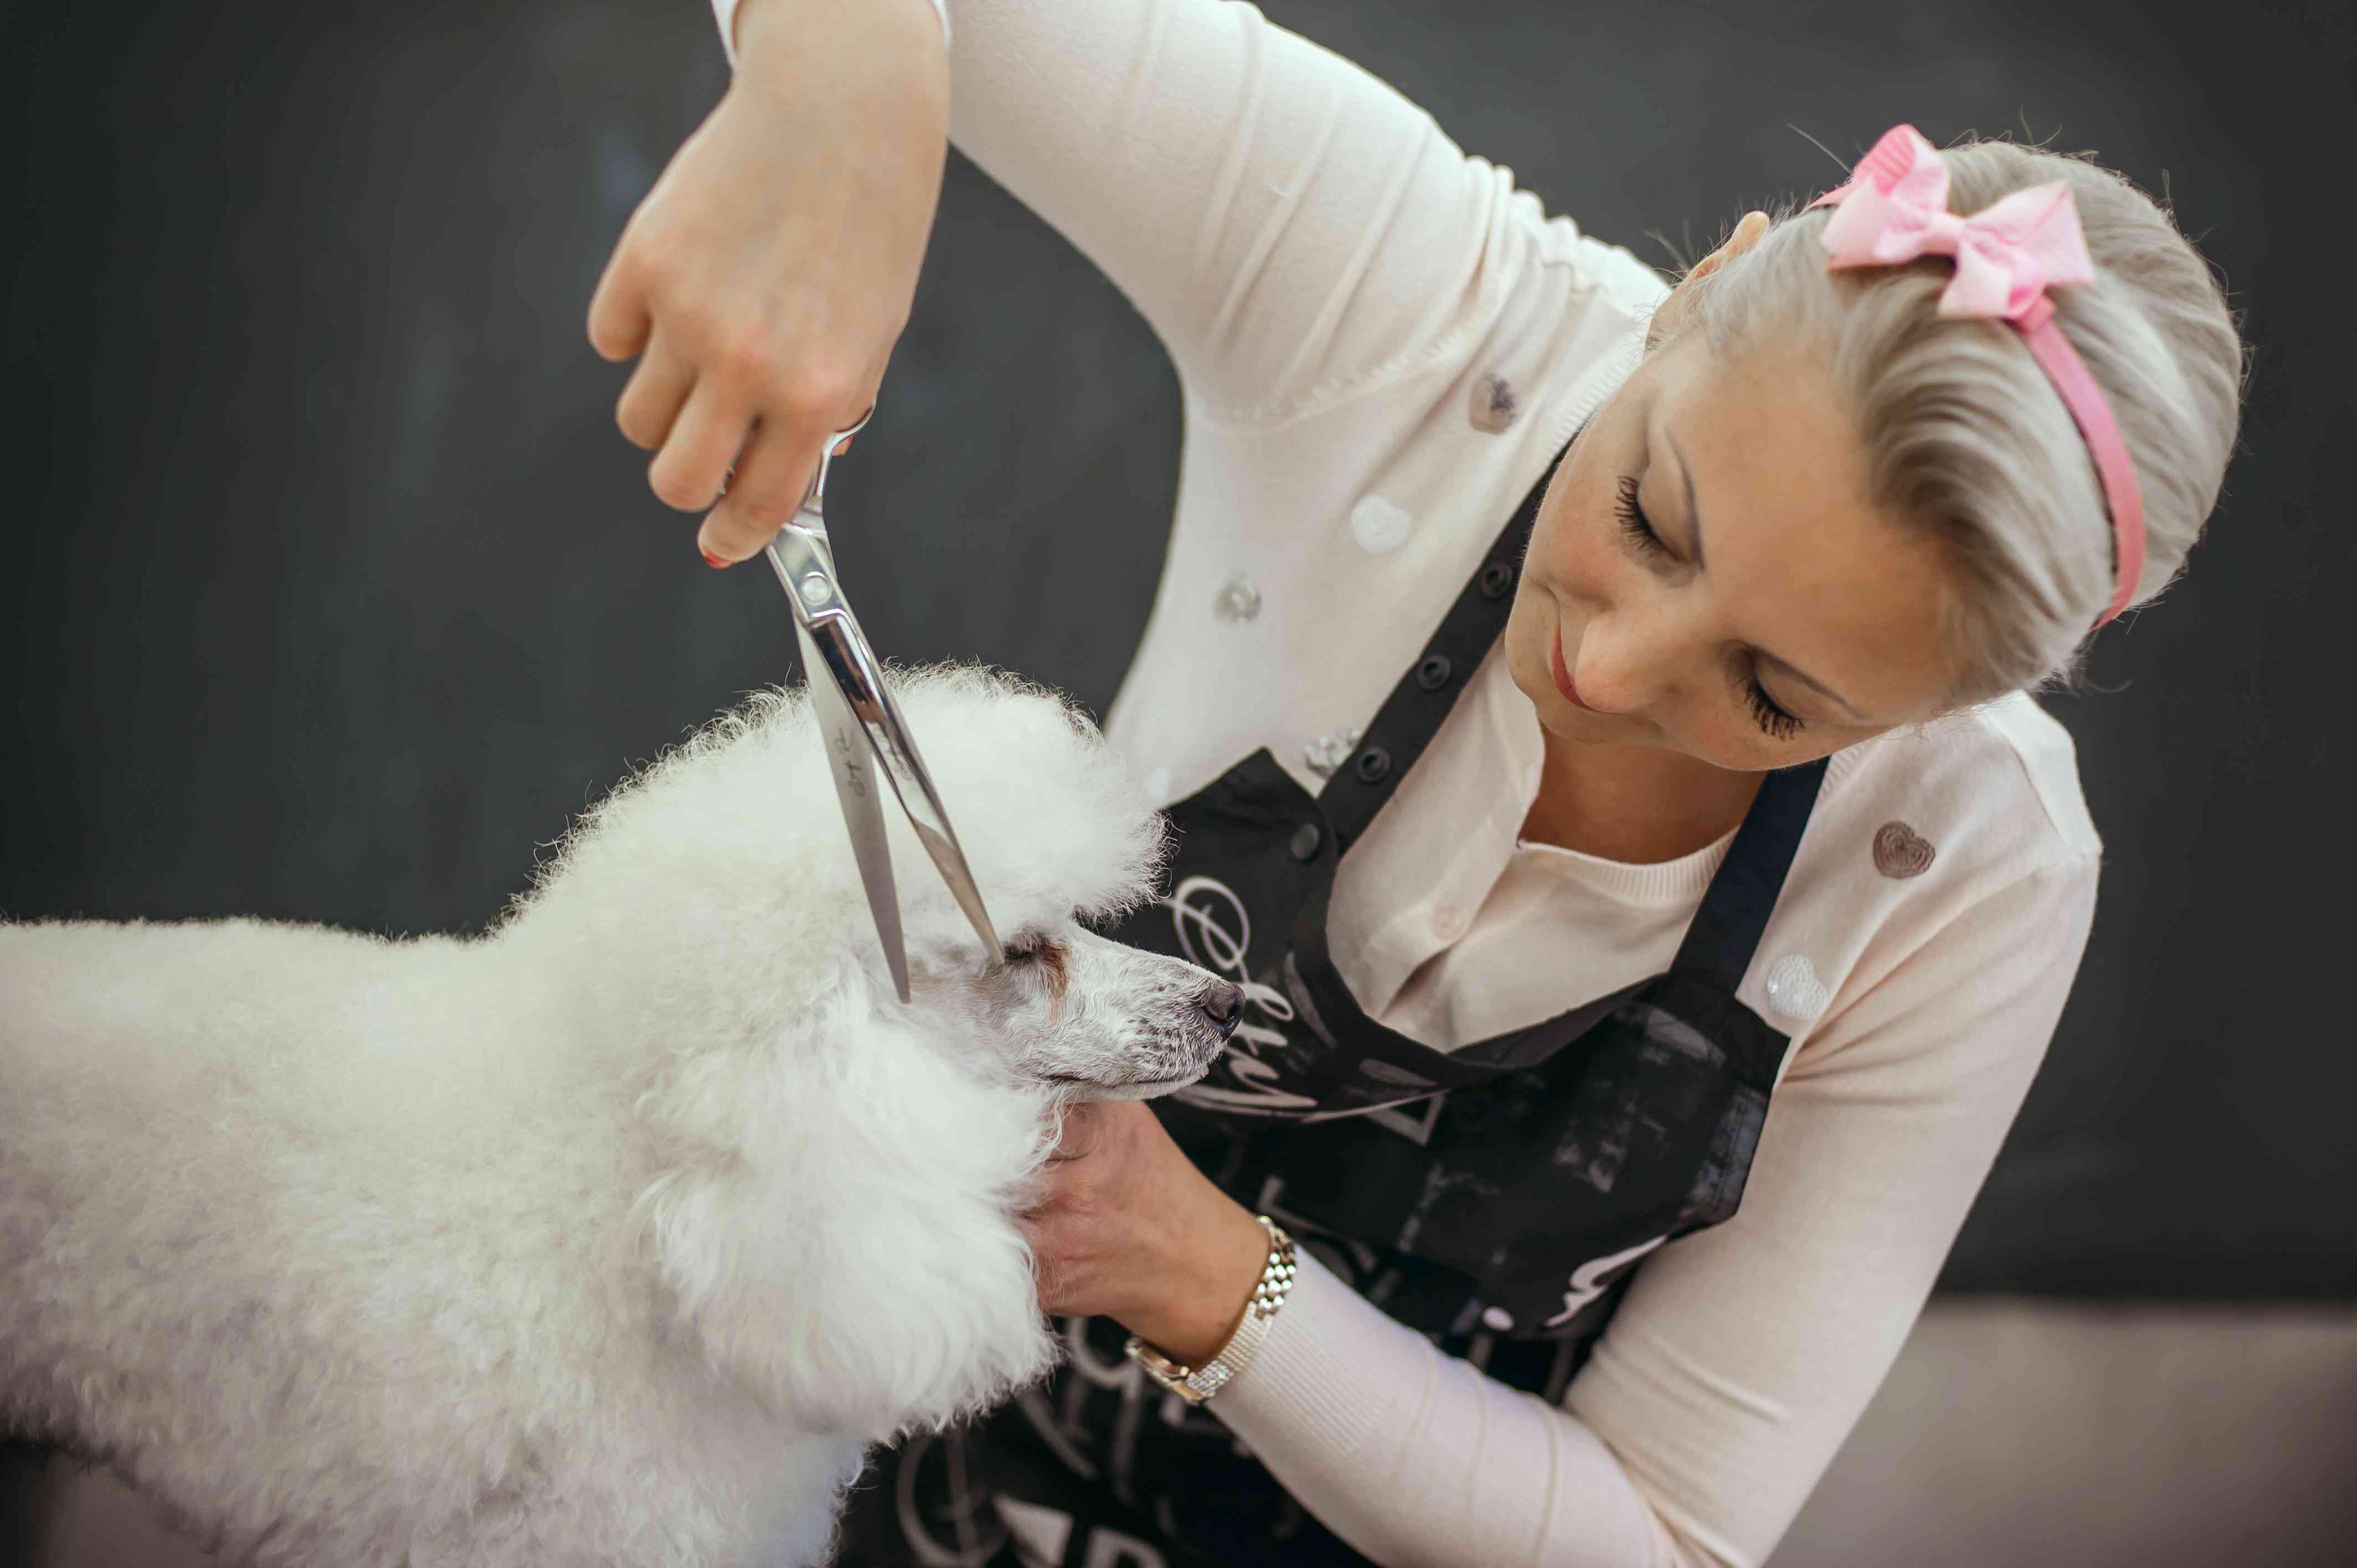 A white Toy Poodle getting a hair cut.